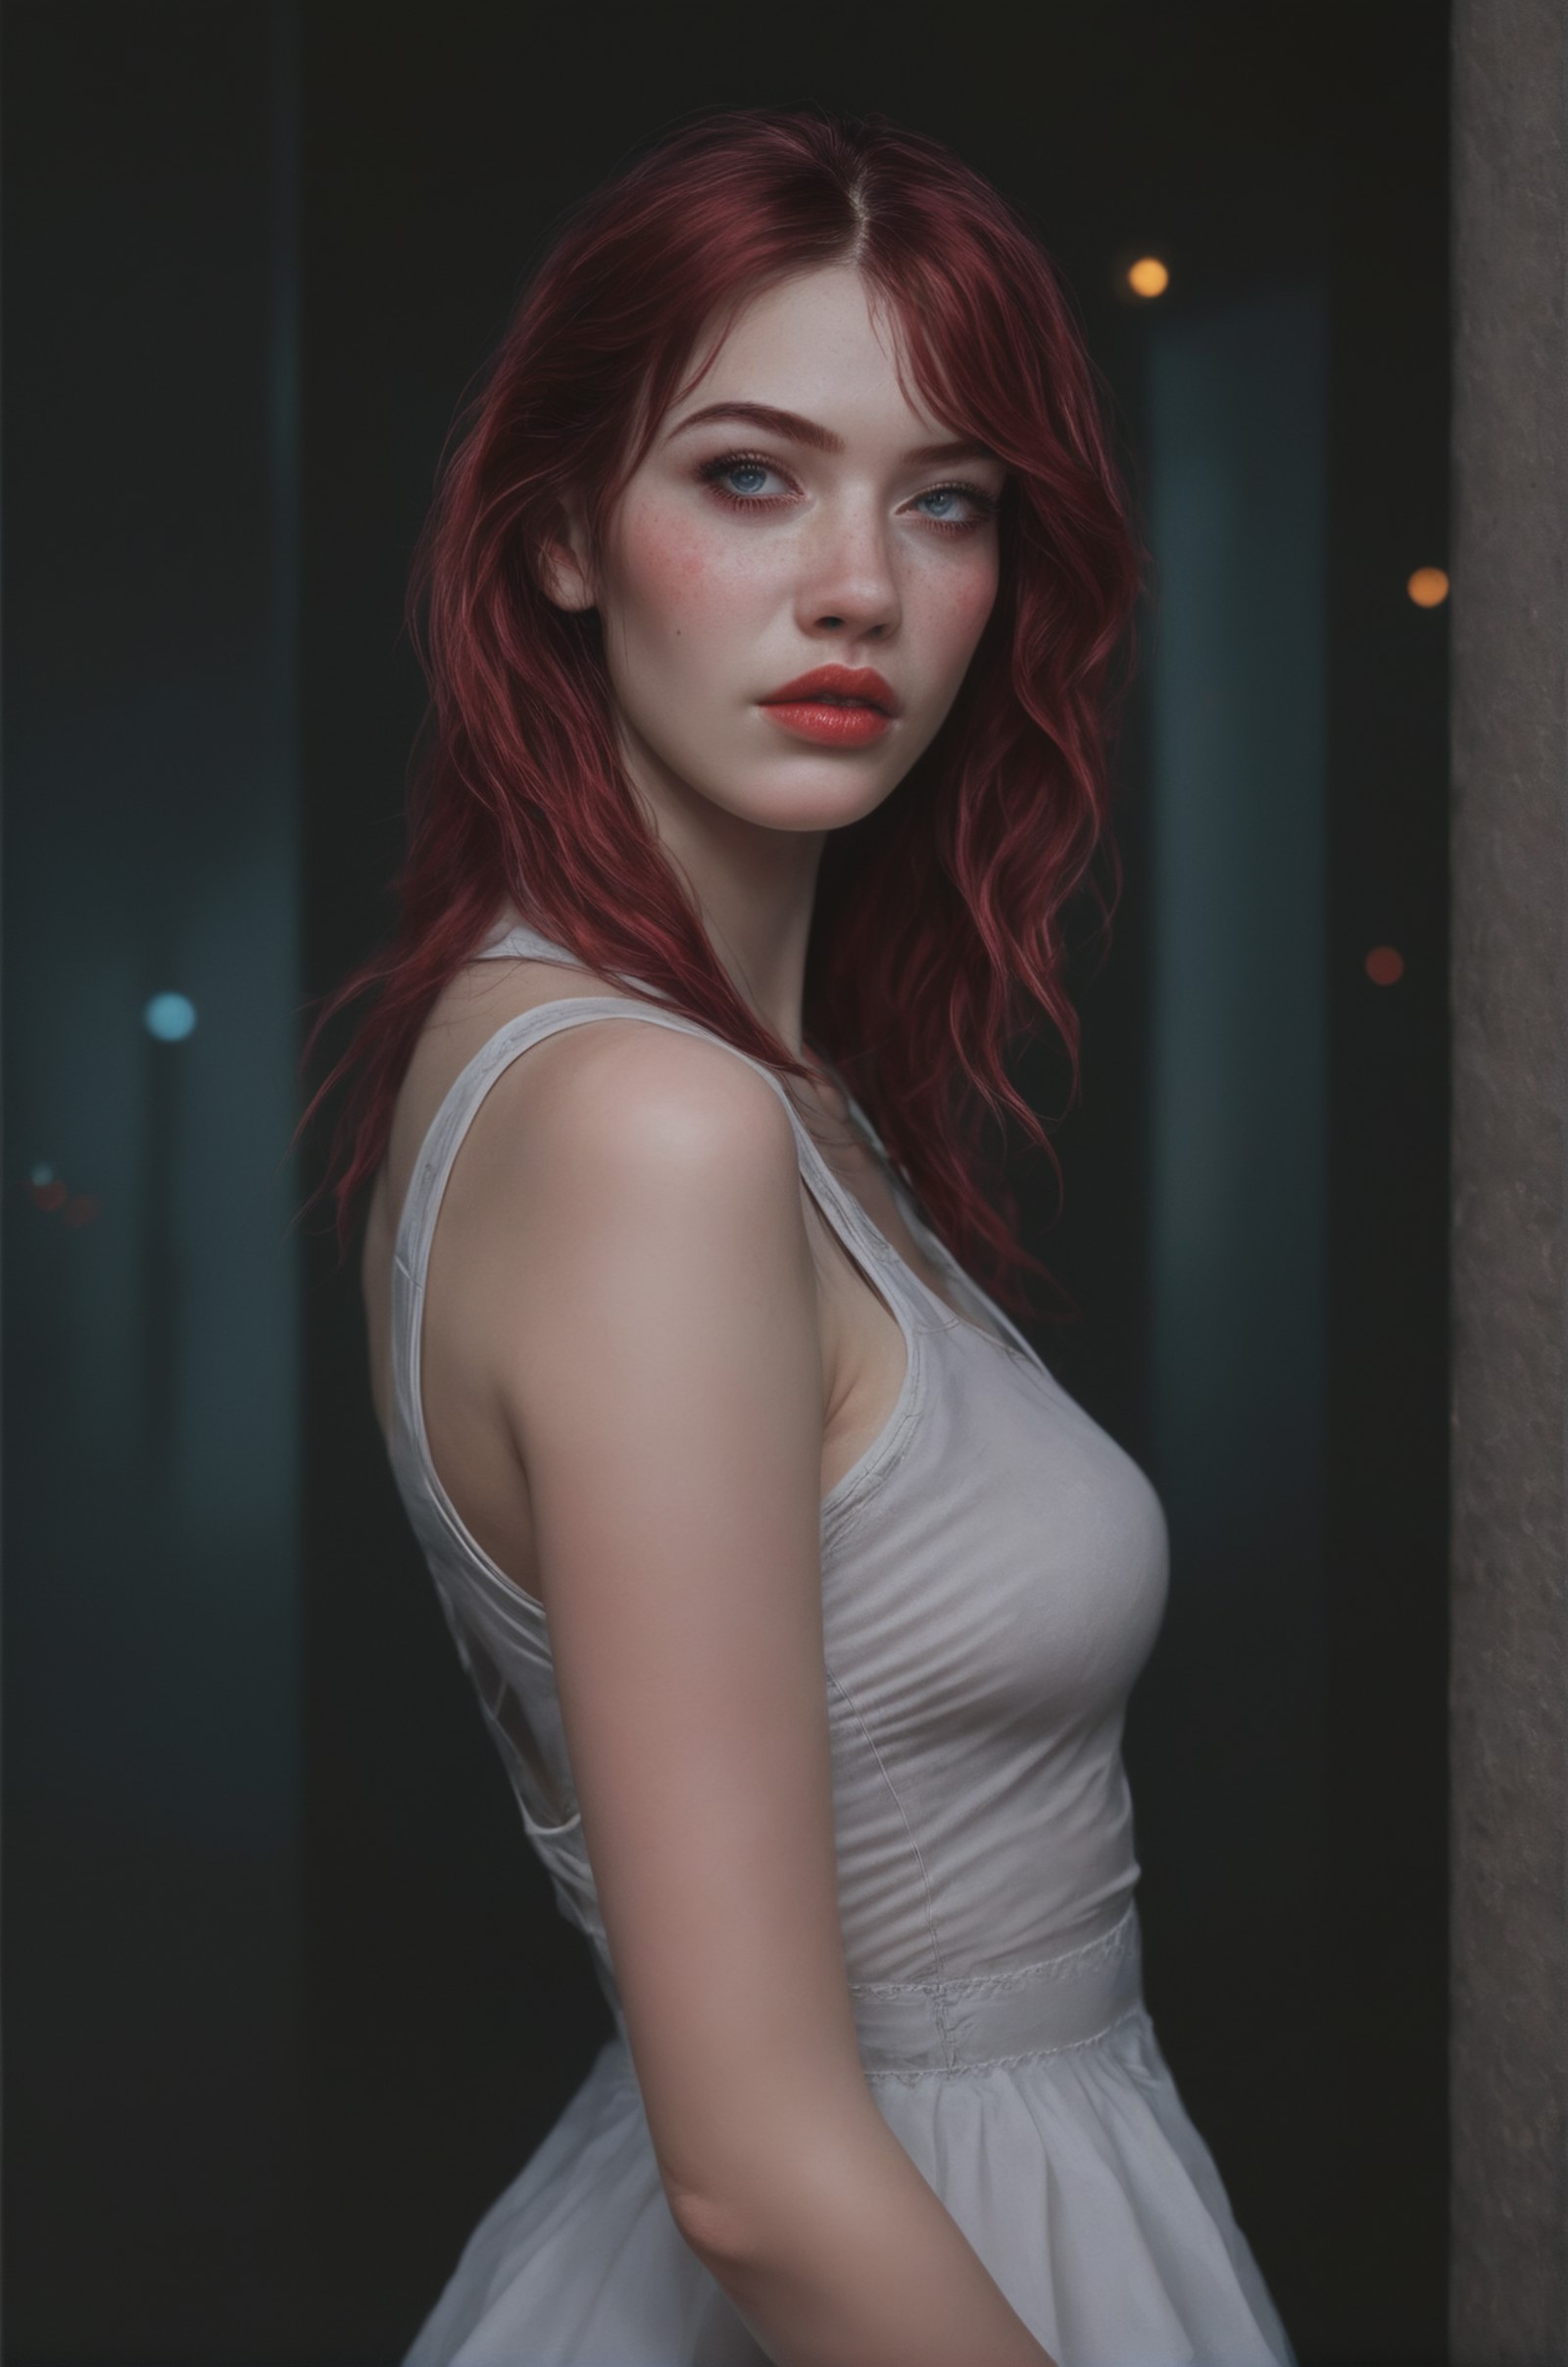 pale woman walking back from nightclub at night, long red hair, pale skin, city street background, wearing clubbing outfit...